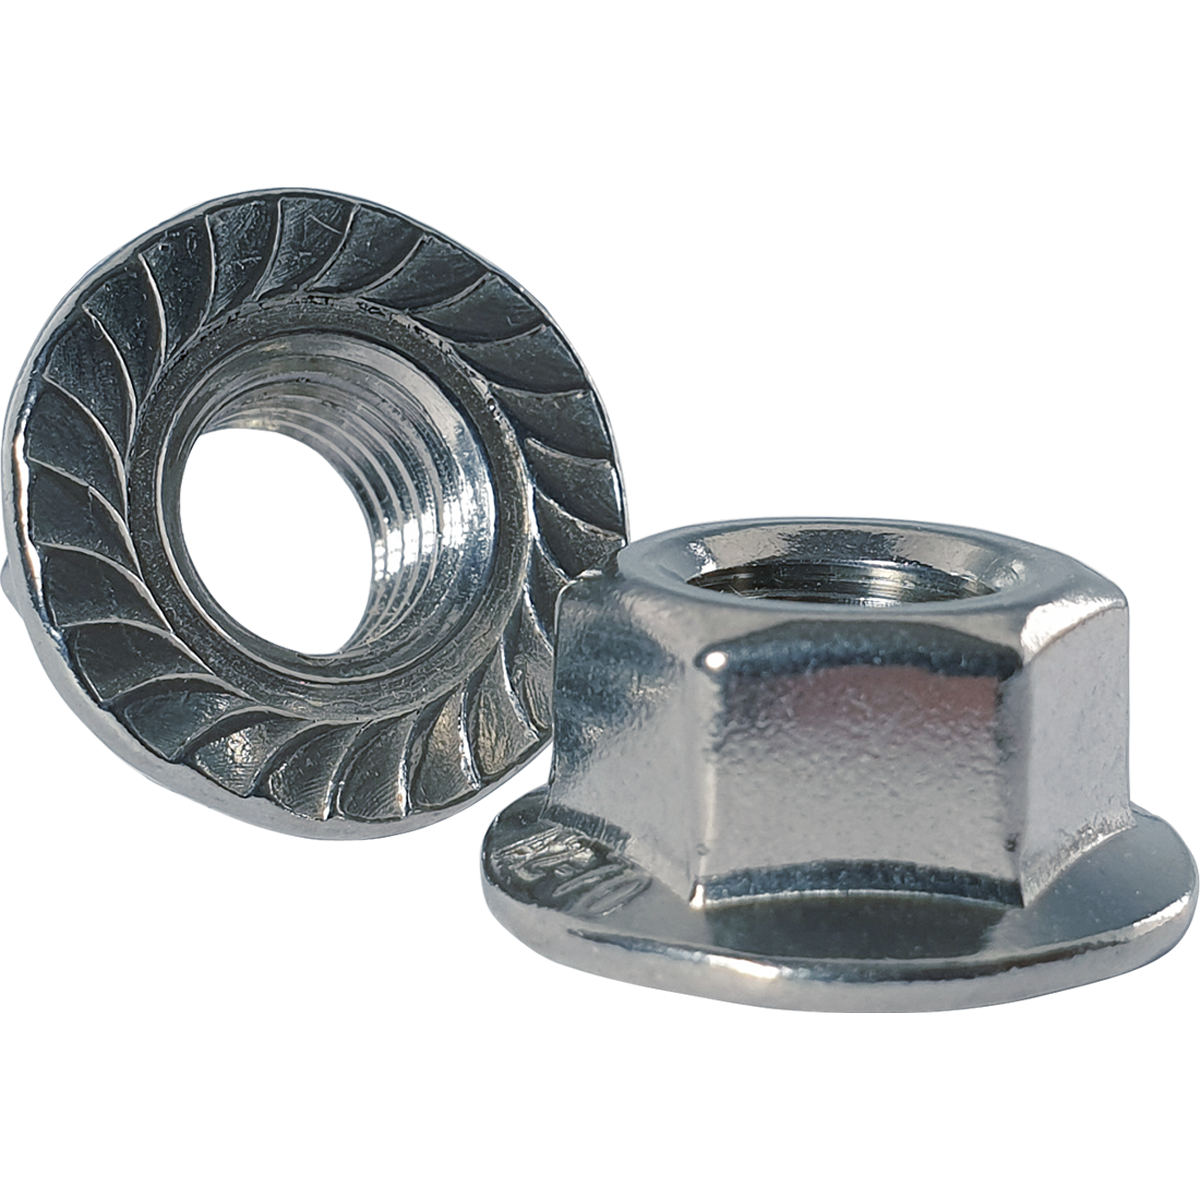 Serrated flange nuts, also known as serrated flange lock nuts are available in various diameters and at competitive prices.